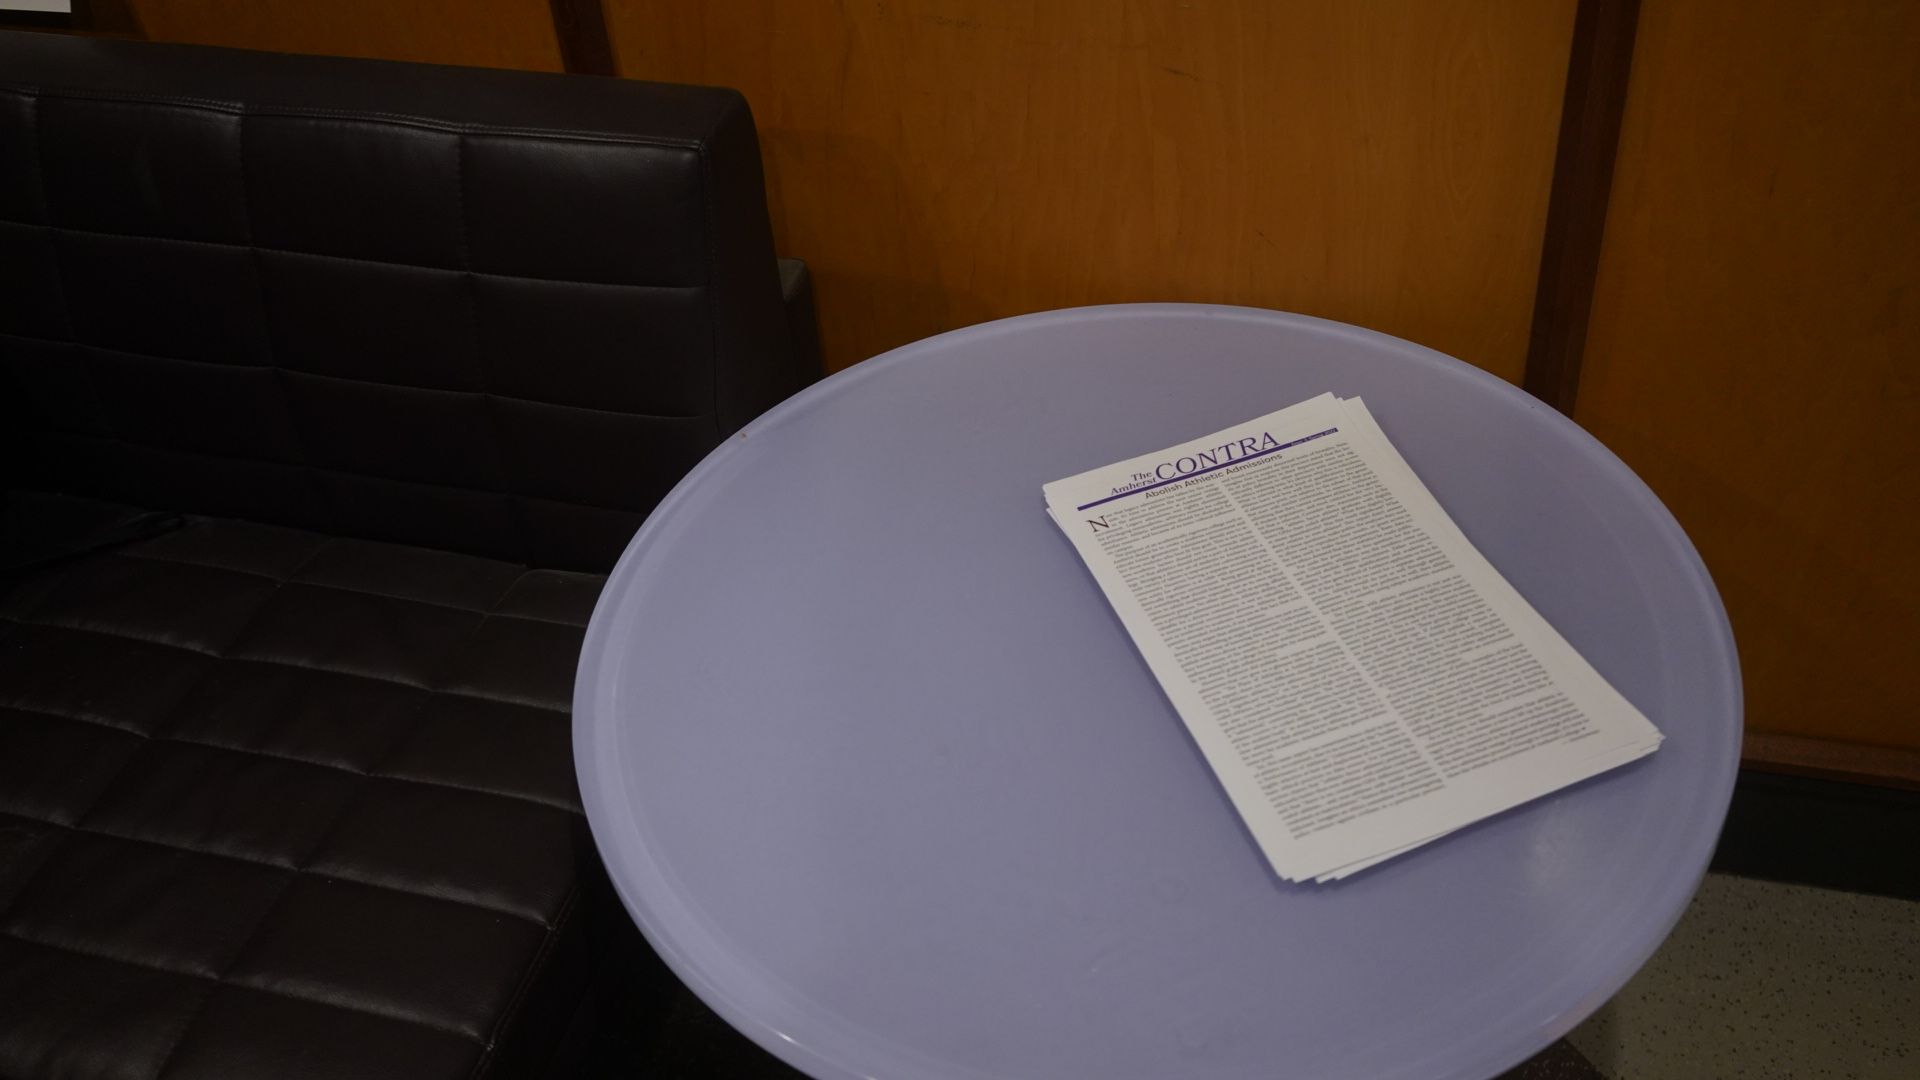 The image depicts several copies of The Contra sitting on a table in Valentine Dining Hall